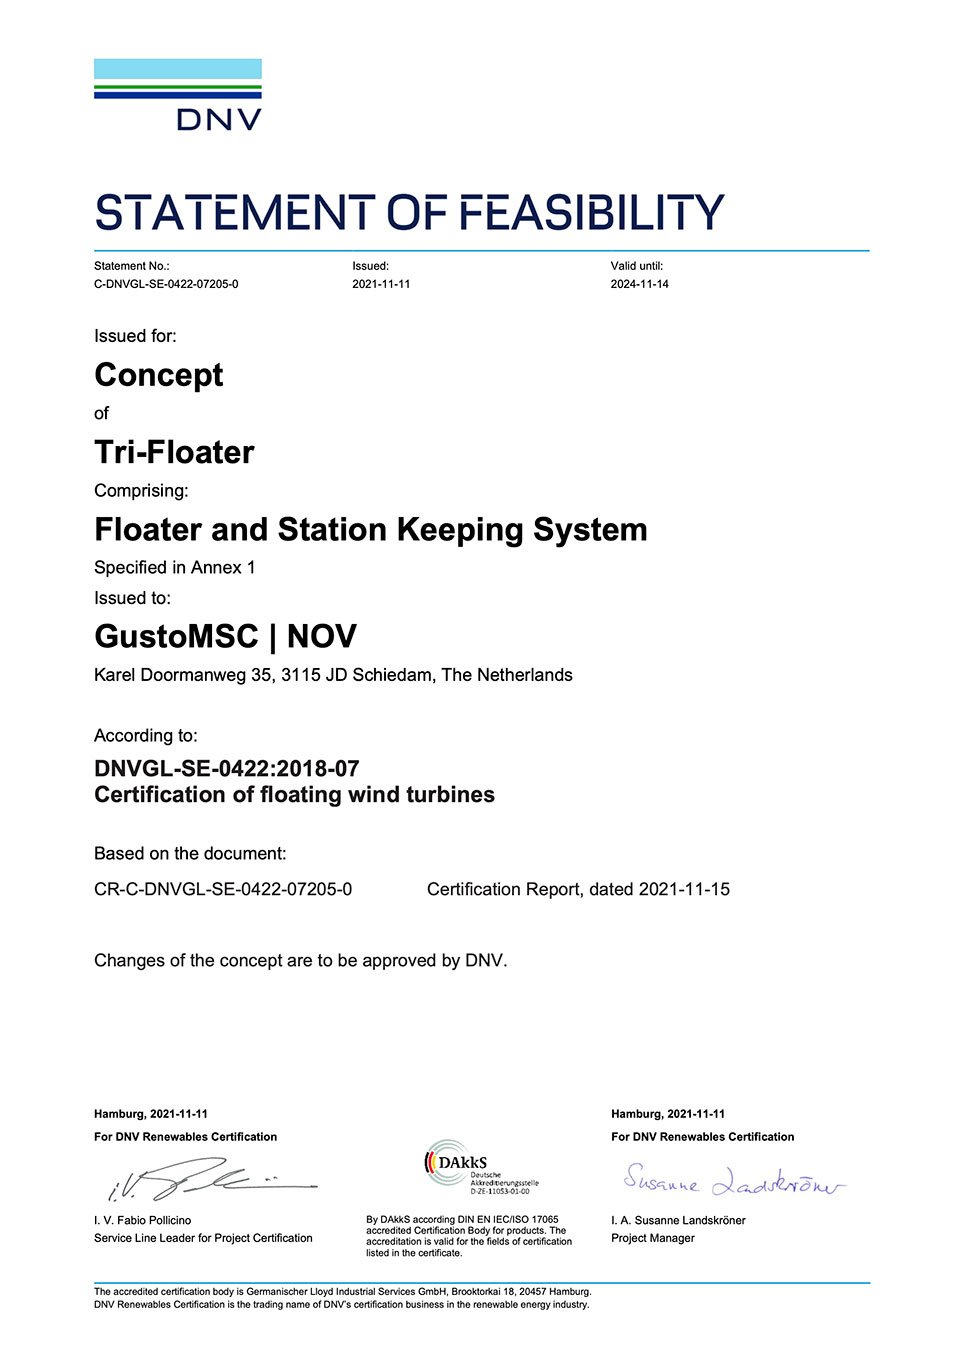 Statement of feasibility